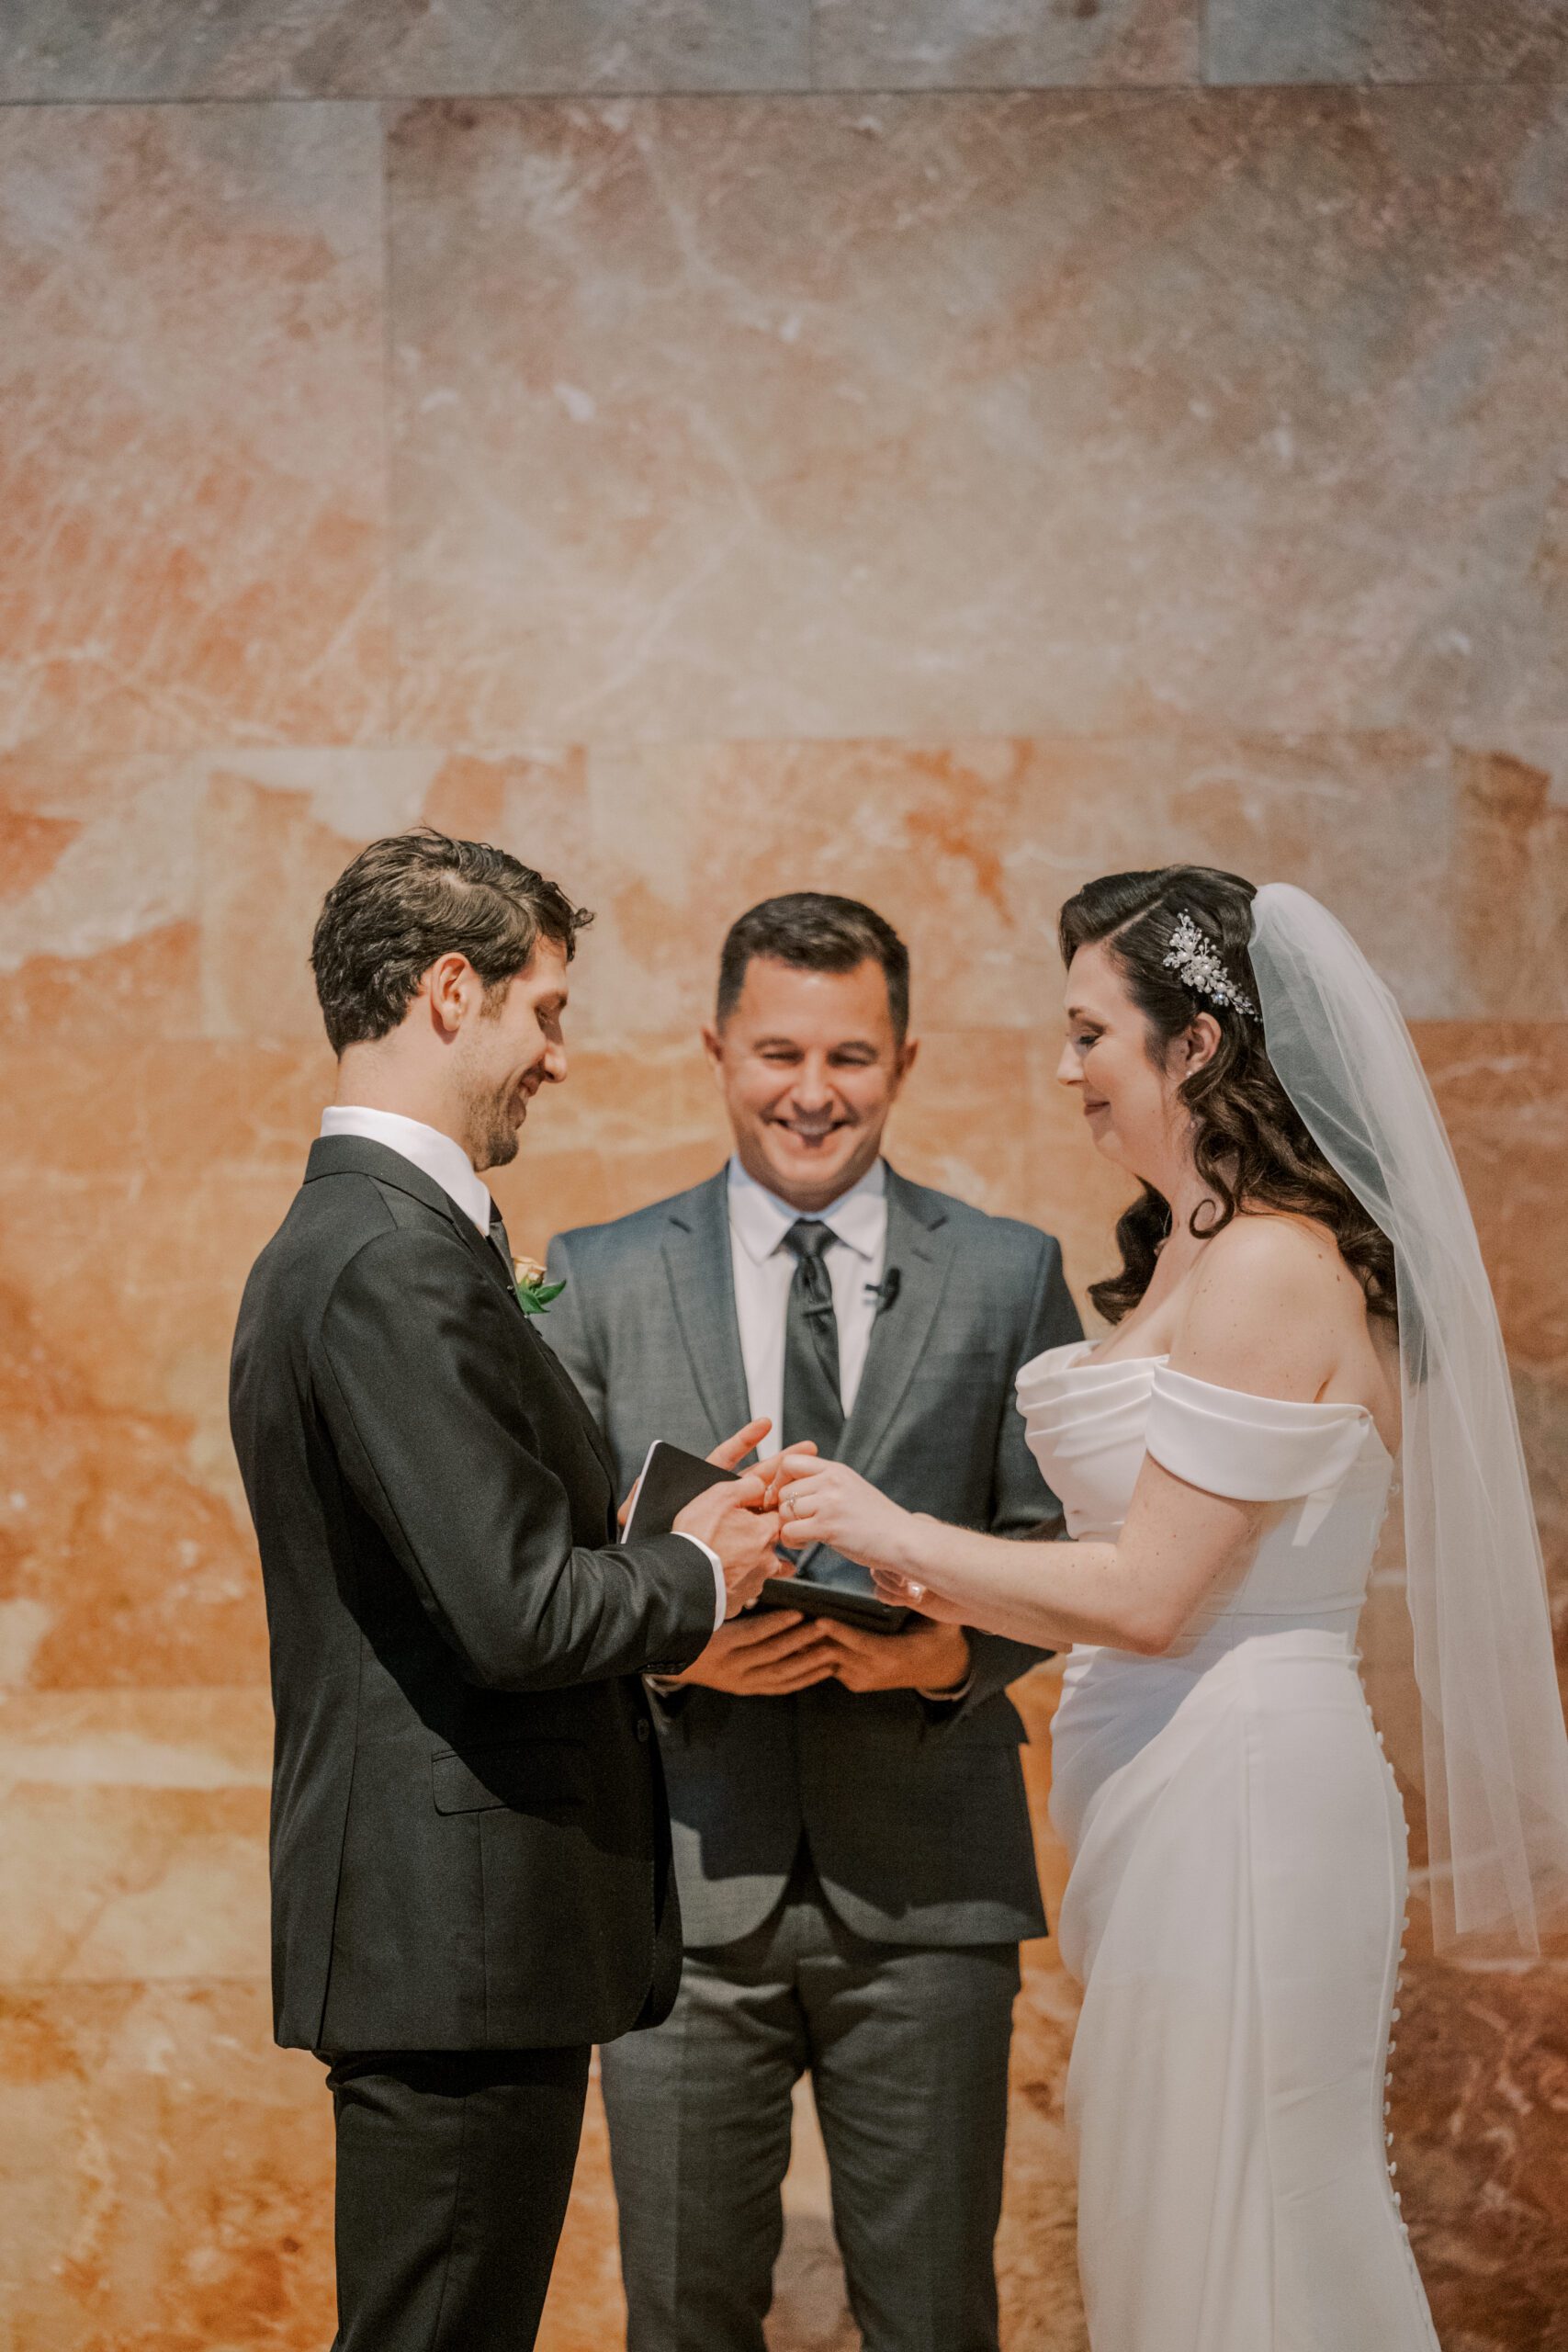 Bride and groom exchanging rings during their ceremony, smiling, with their officiant behind them and a pink marble wall in backgound